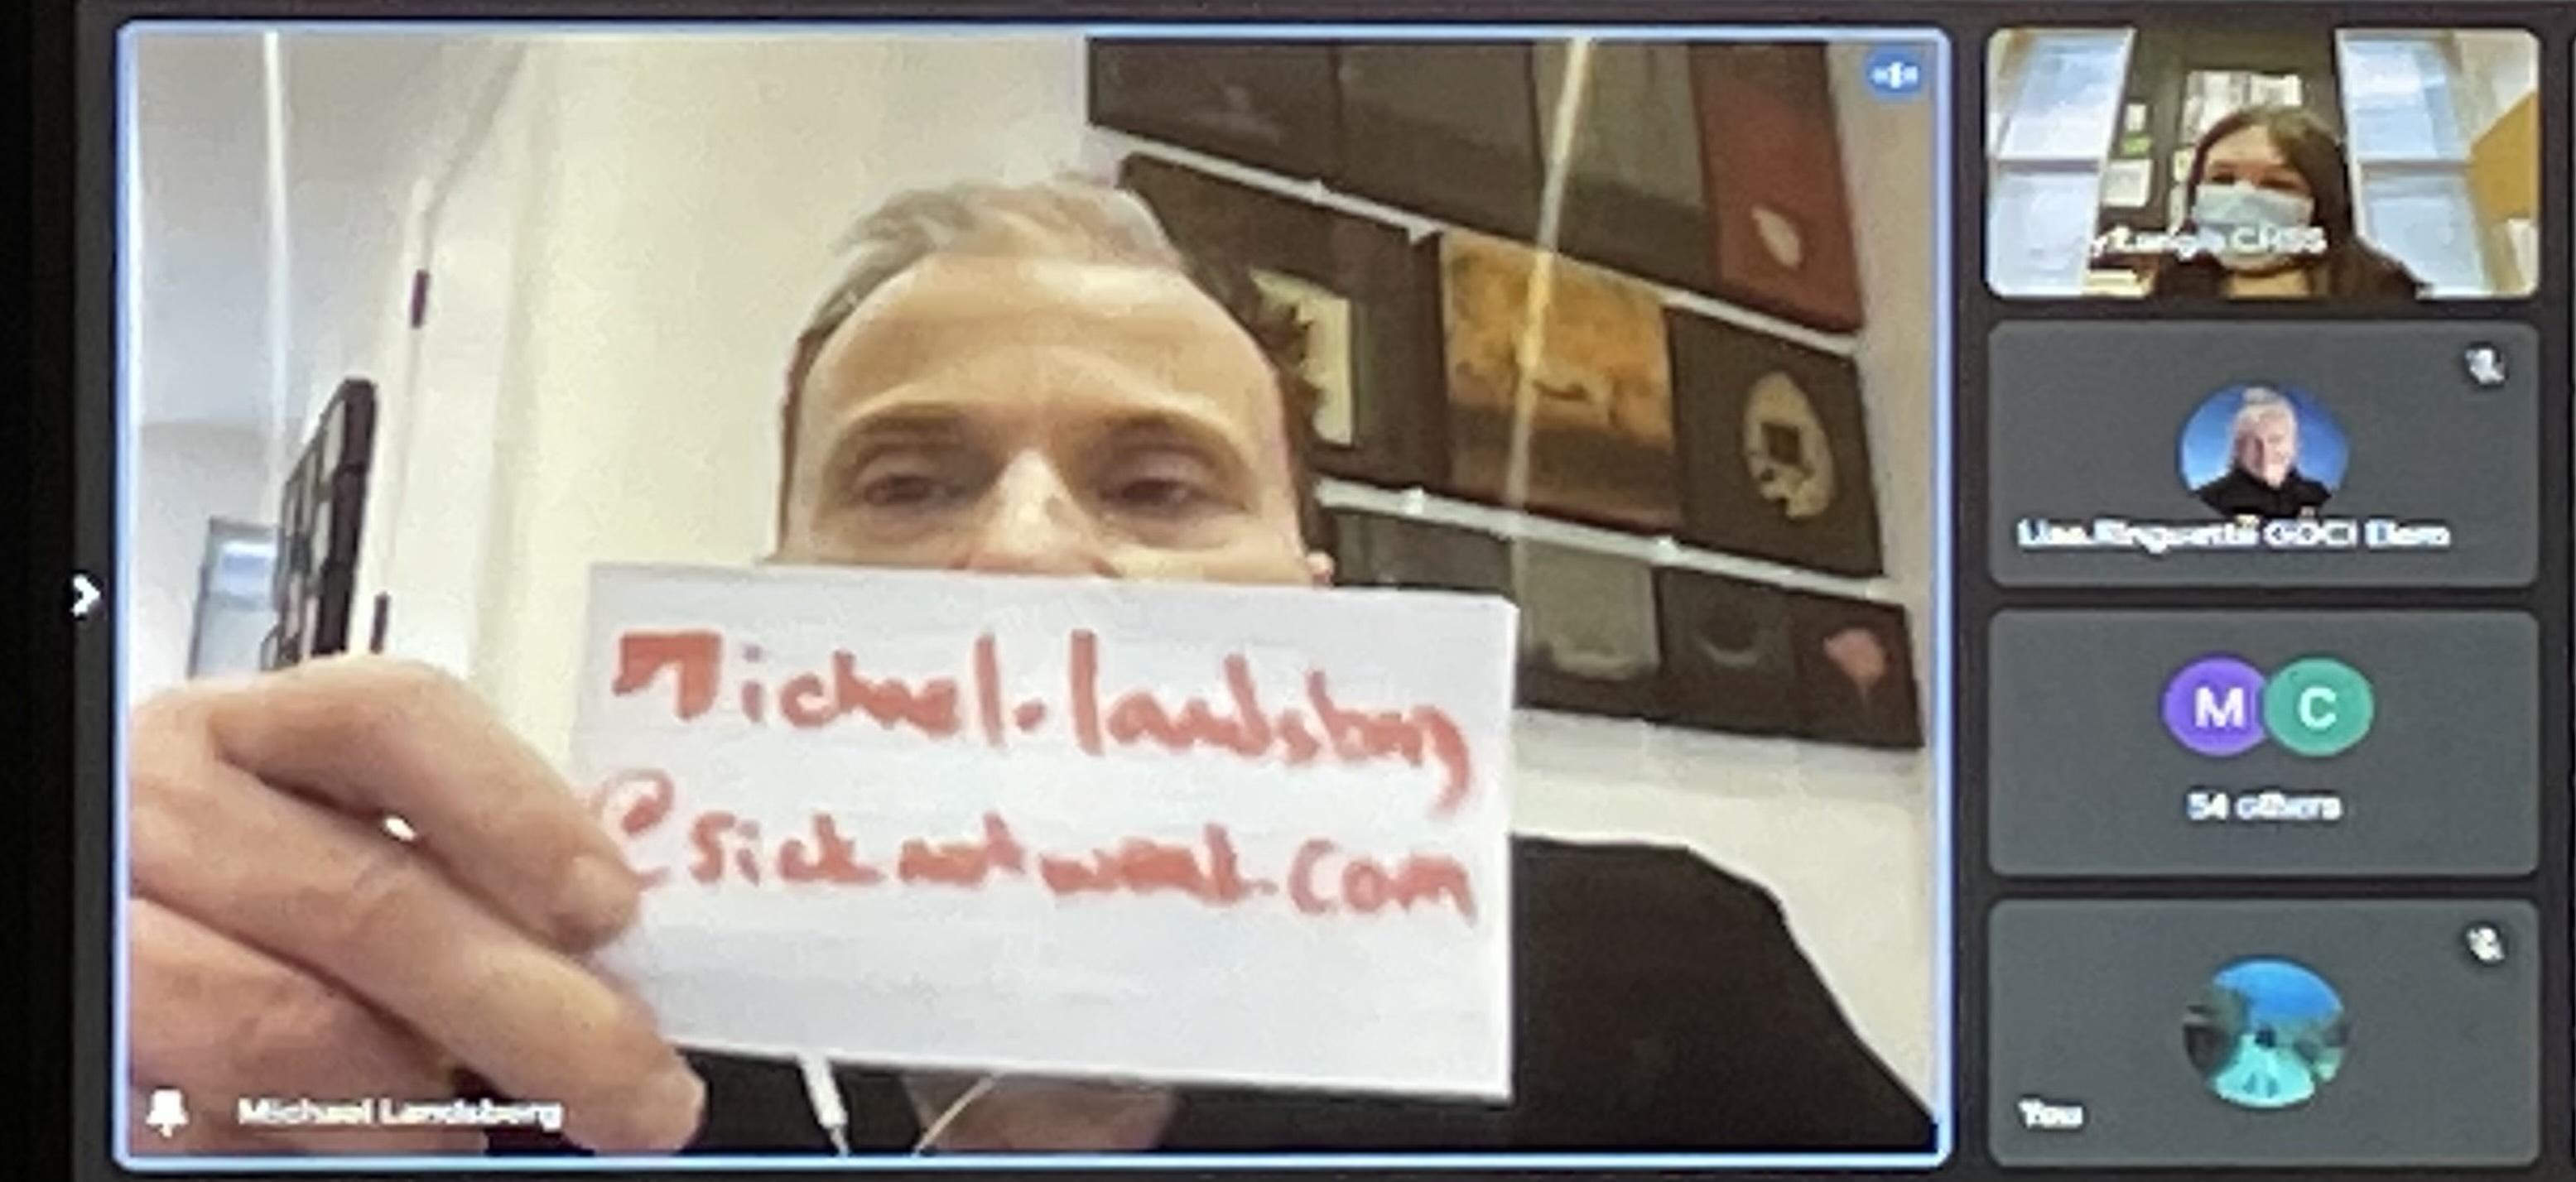 Screenshot of video conference showing Michael Lansberg holding up a piece of paper that reads #sicknotweak